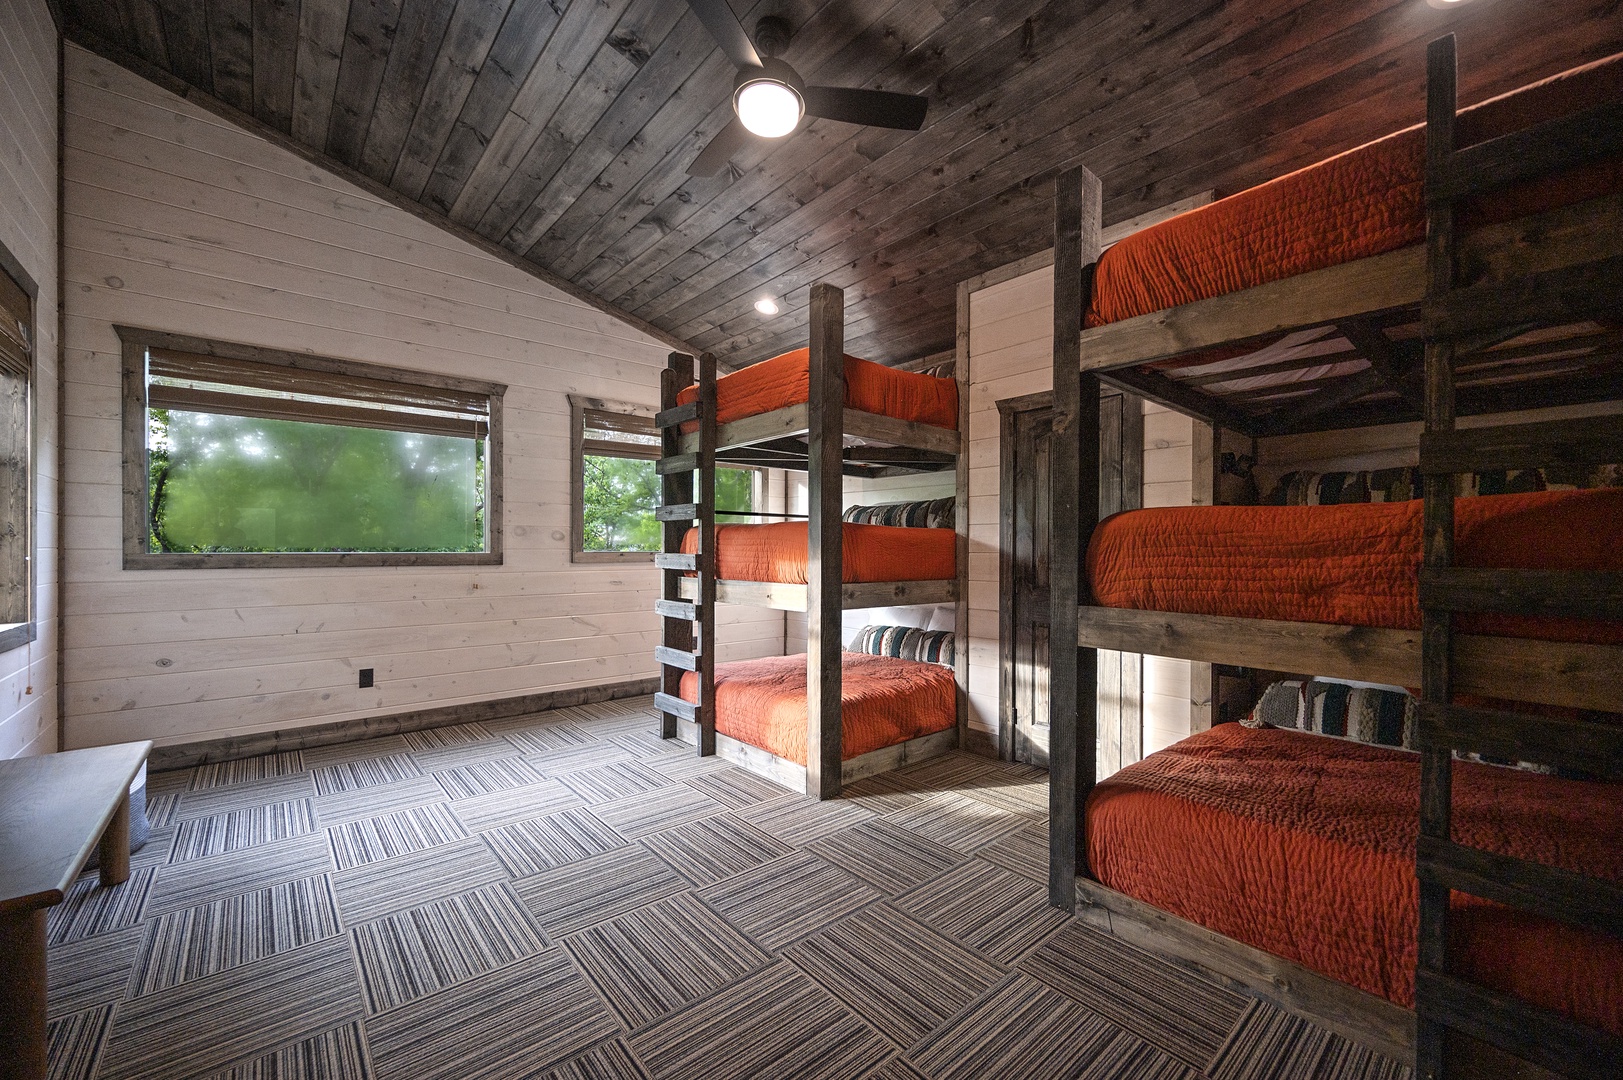 Boys' bunk room with 6 double beds sleeping up to 12 guests